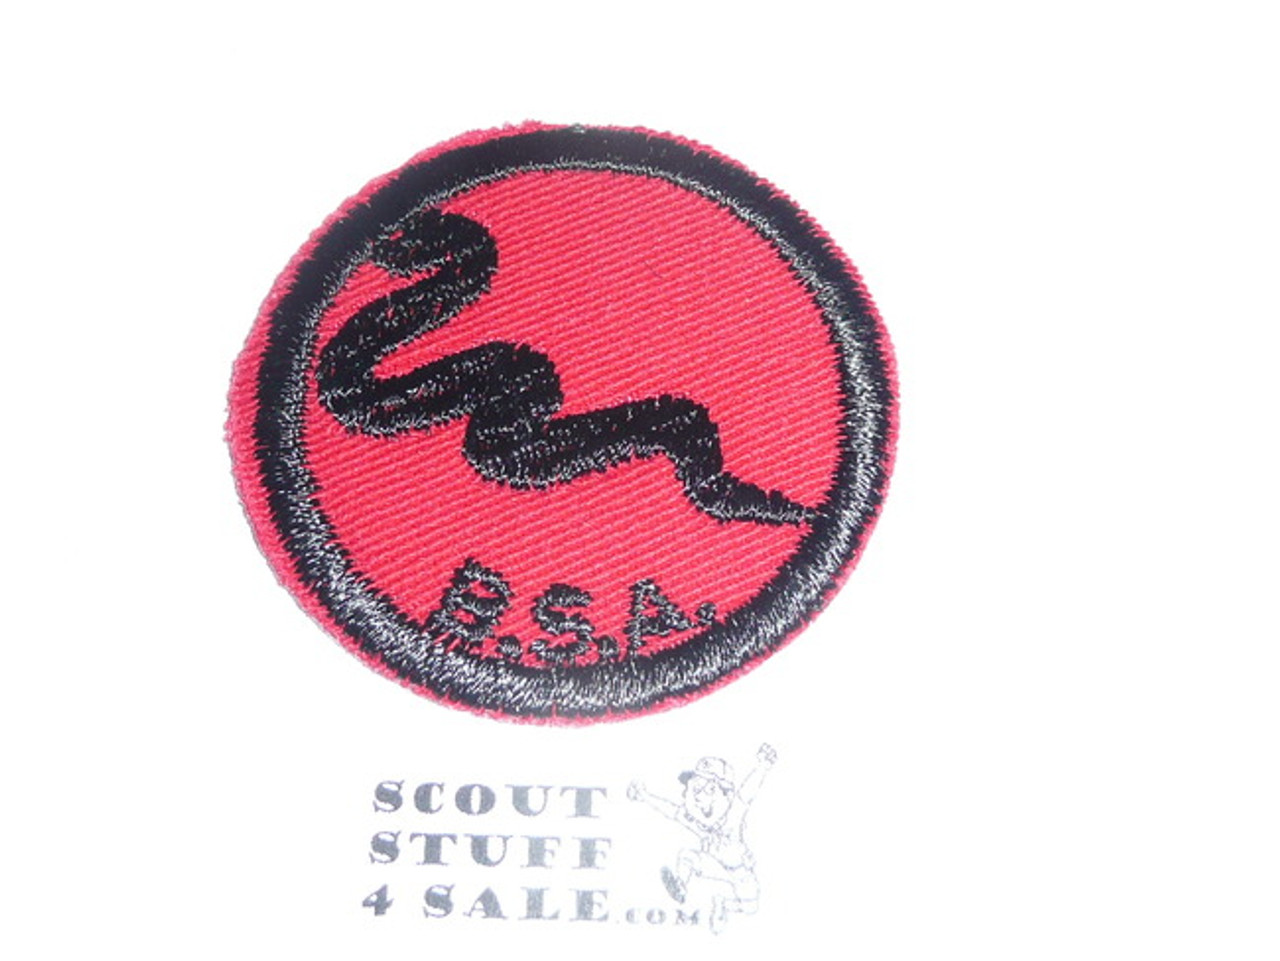 Rattlesnake Patrol Medallion, Red Twill with red rubber back, 1955-1971, lite use